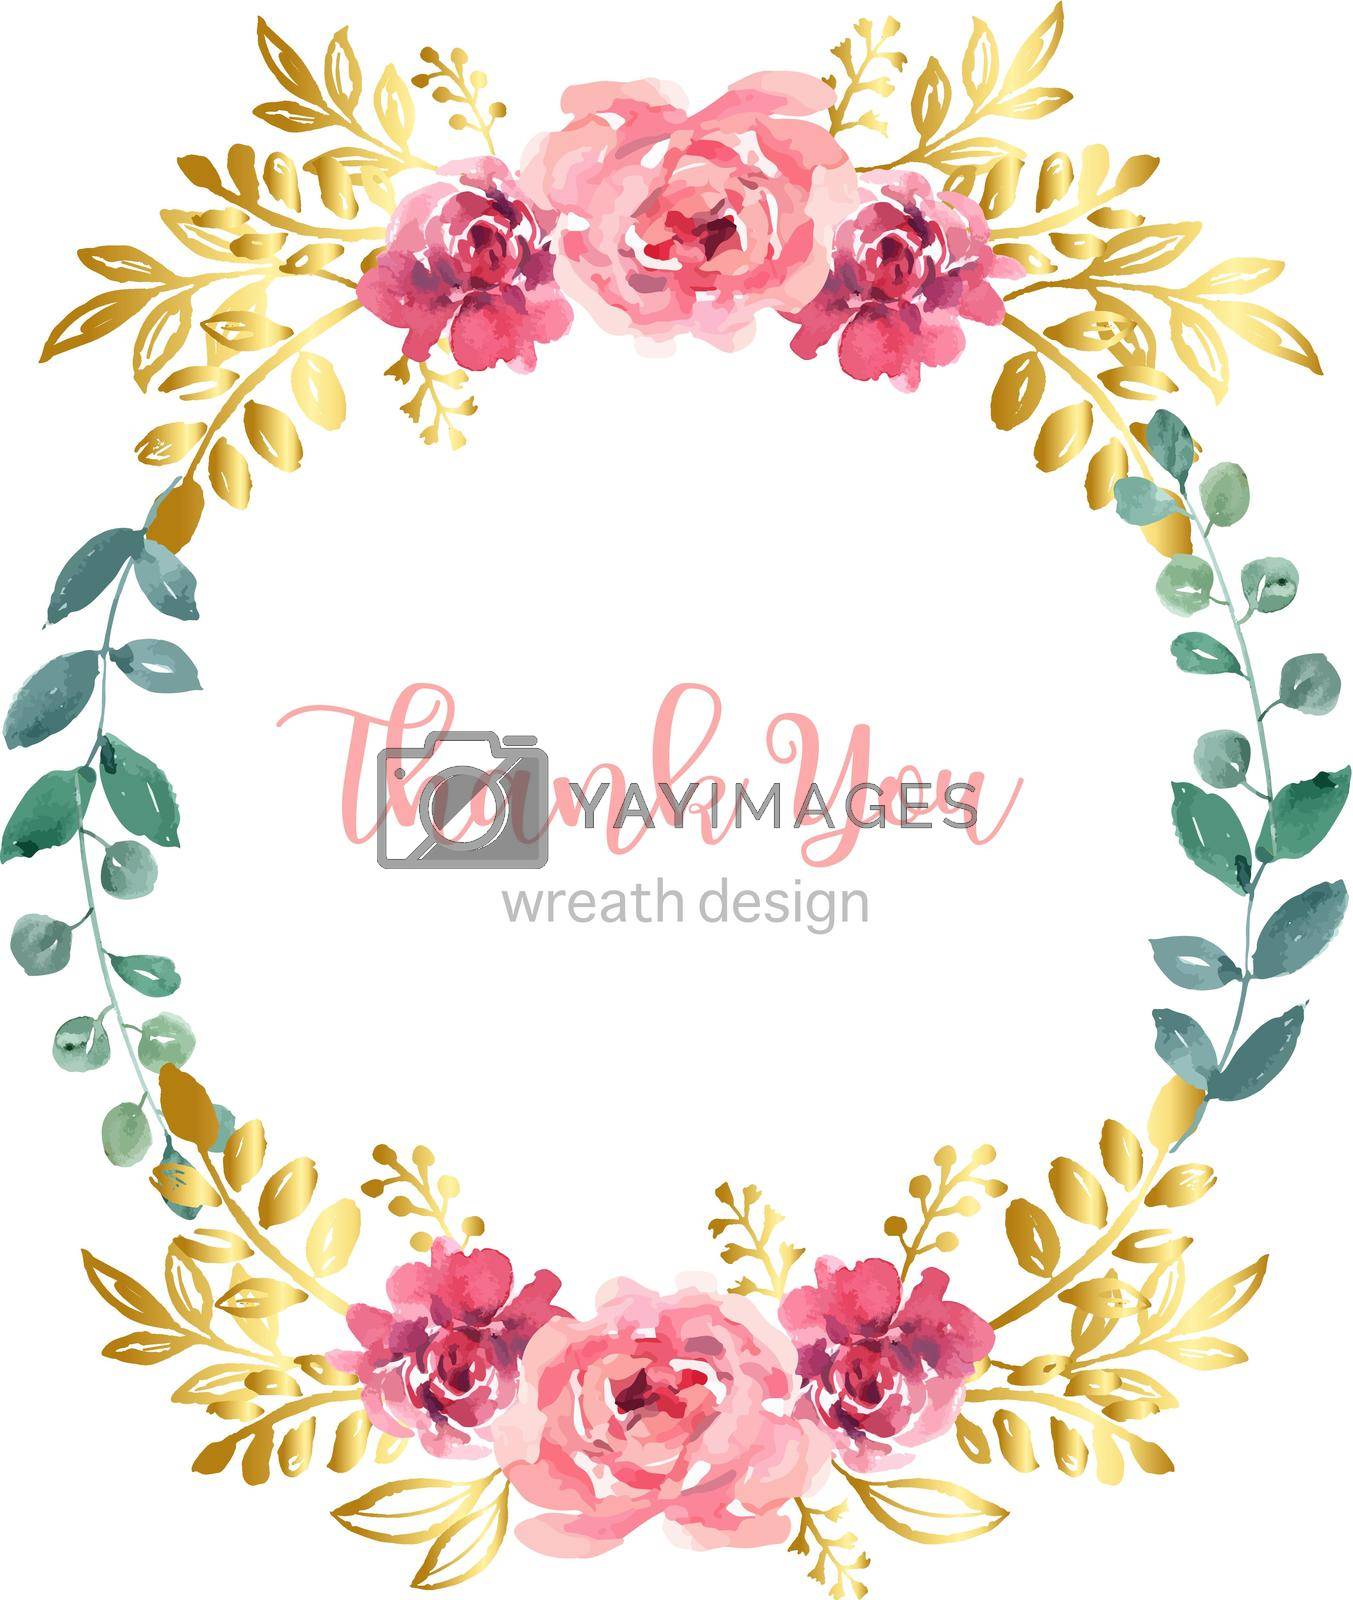 Royalty free image of Wreath Card Design for artwork, sweet watercolour foliage vector illustration Template by Photographeeasia